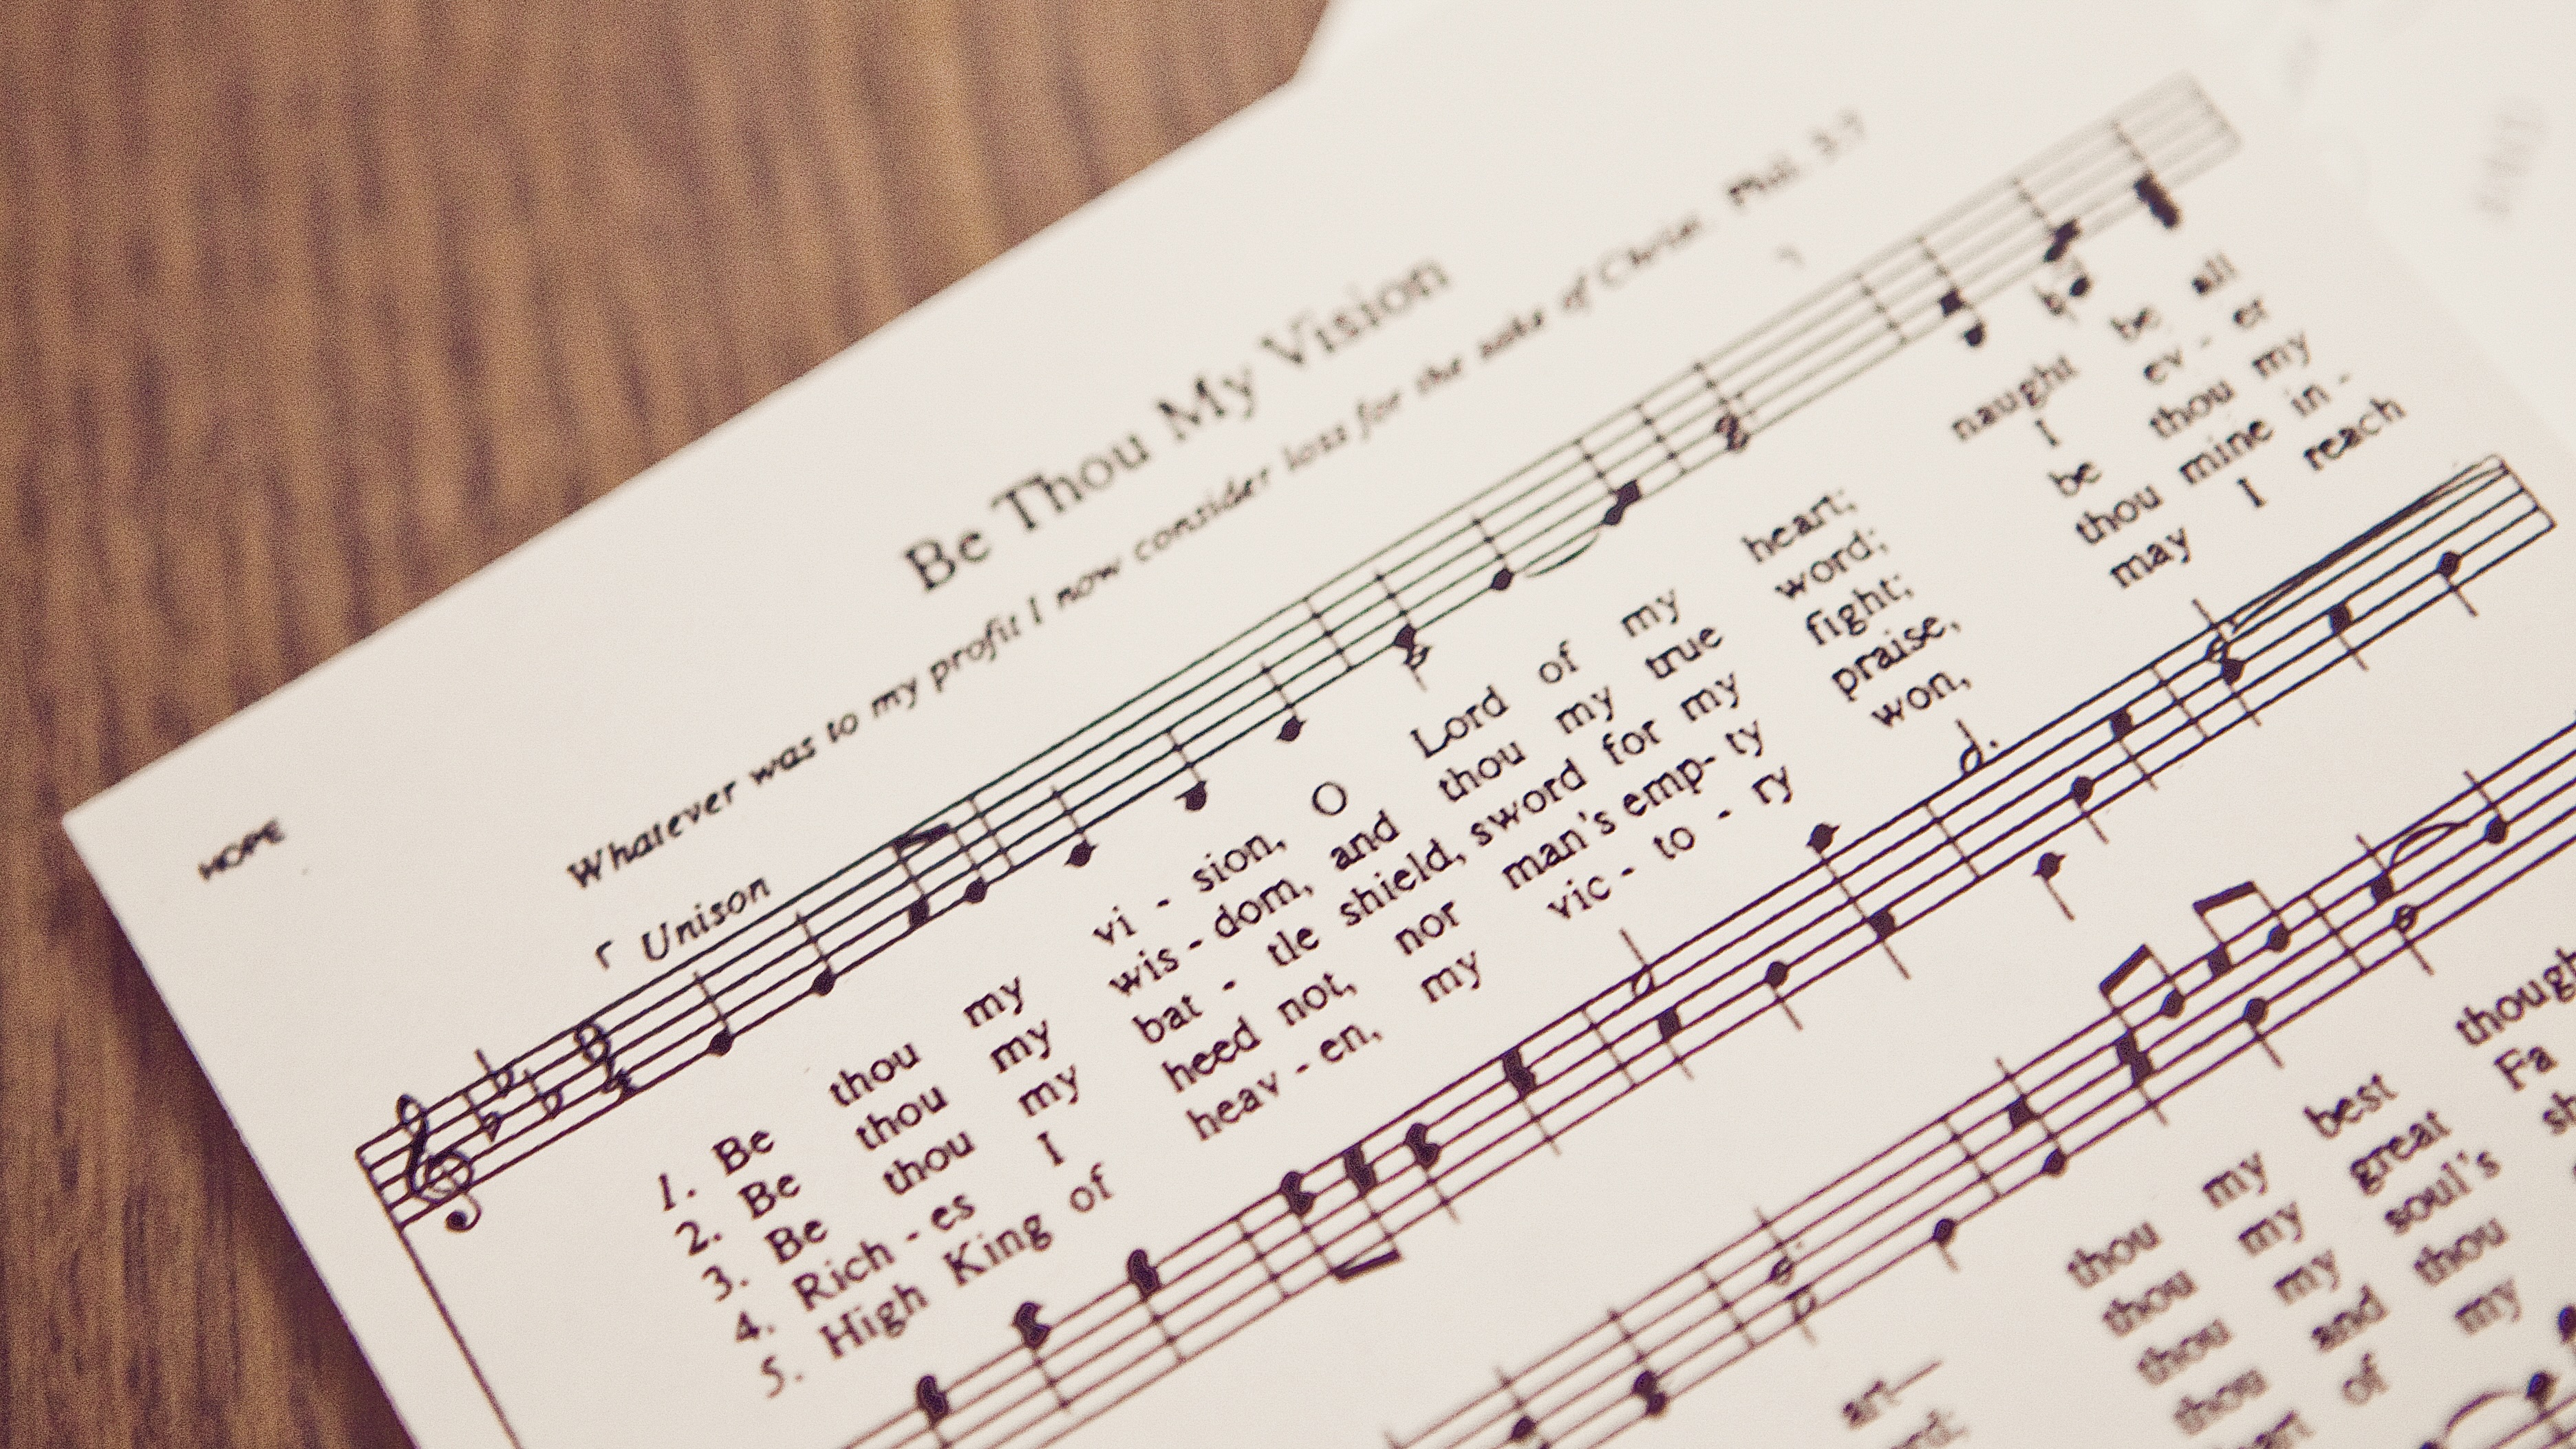 hymn_page_of_be_thou_my_vision-3744x5616